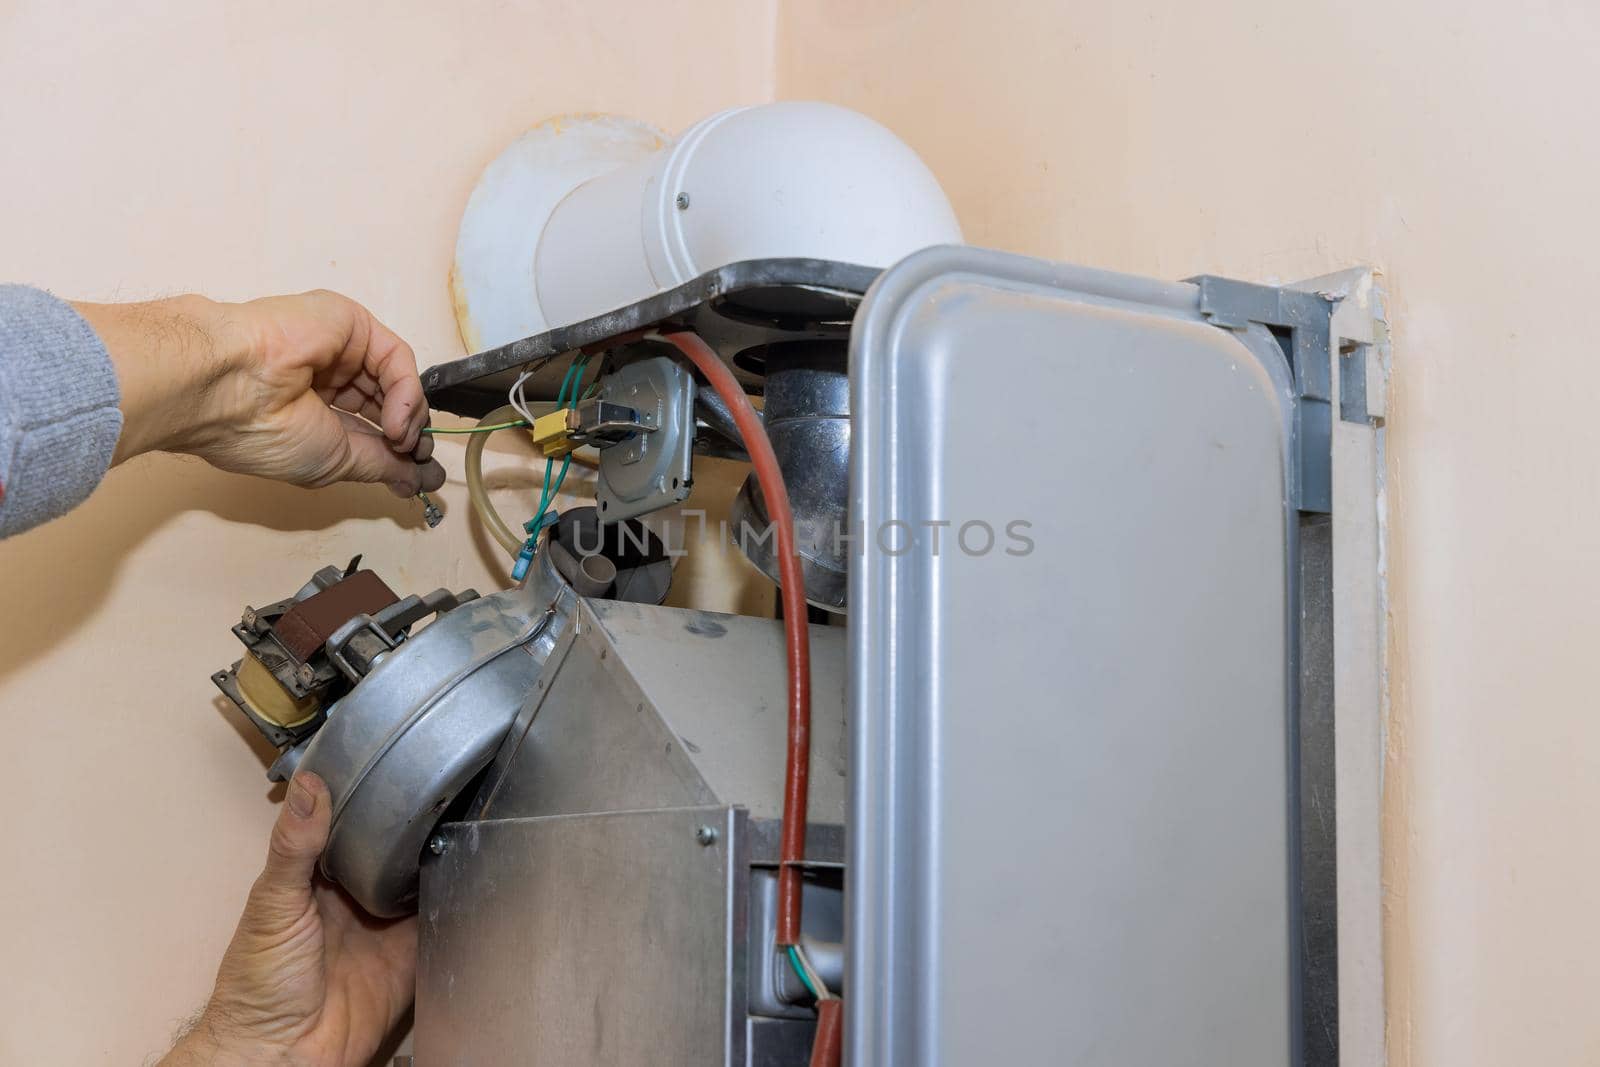 Professional plumber servicing a central heating system boiler at home